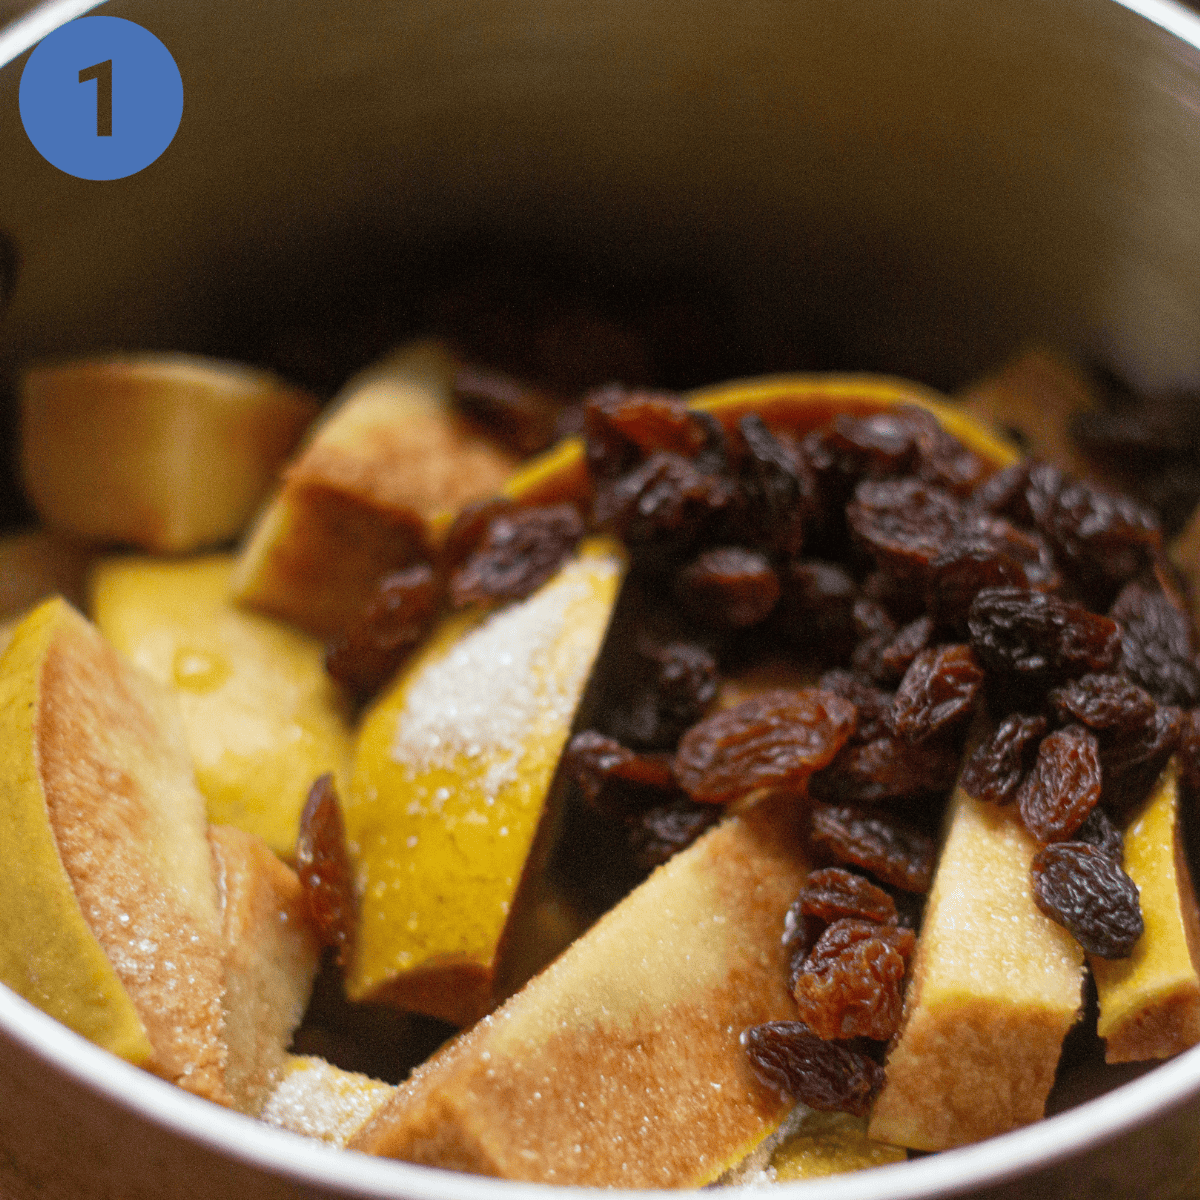 Simmering quinces and raisins in a pan.